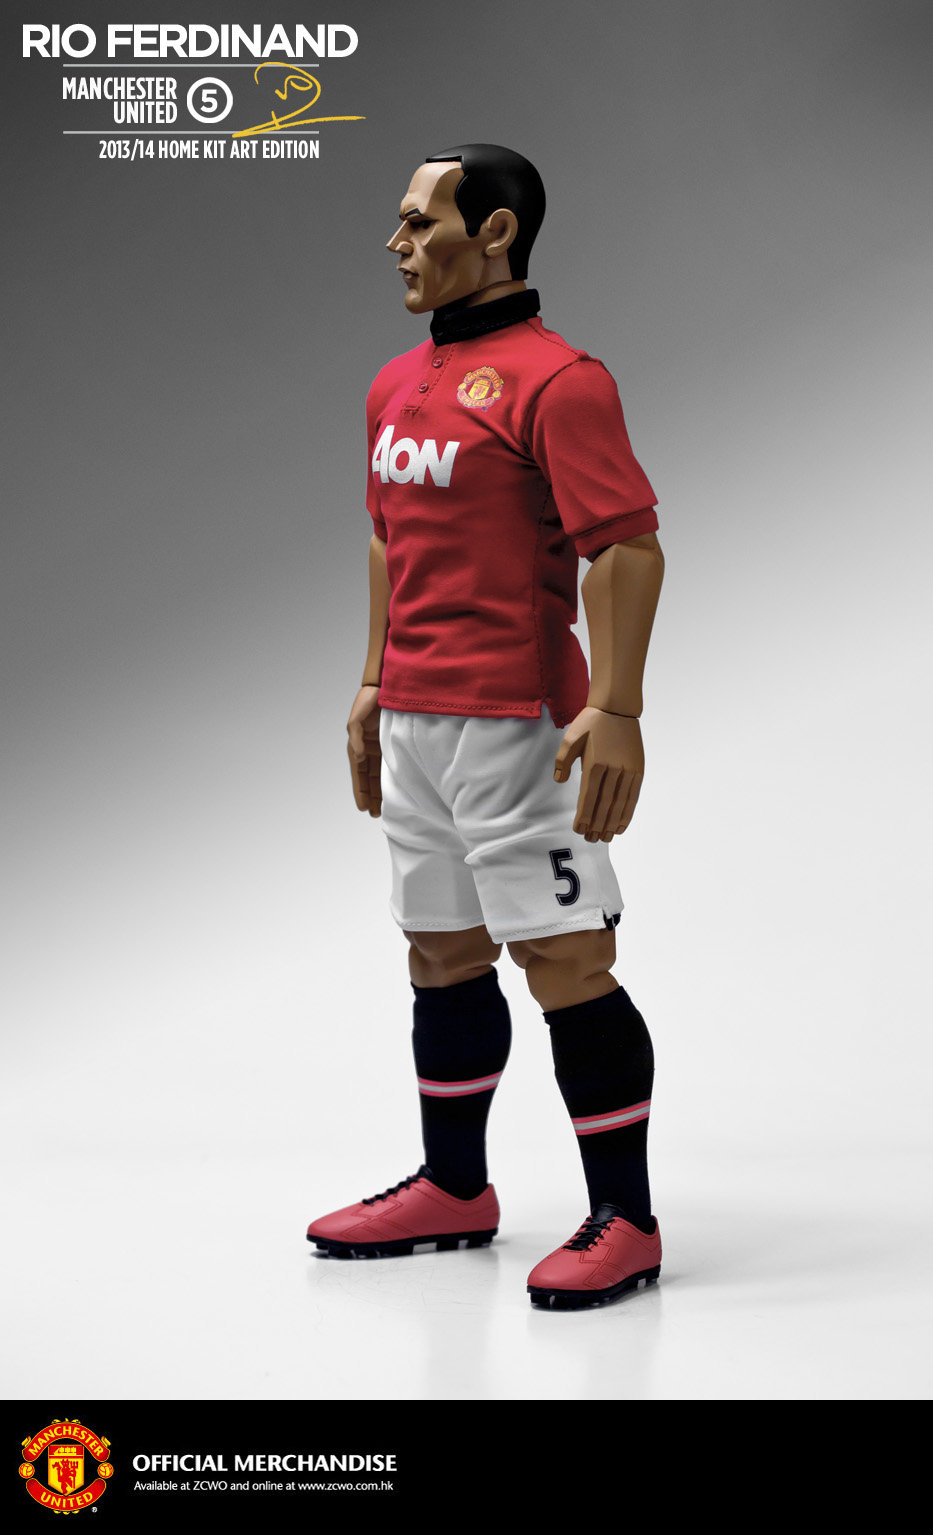 IMINIME/ZC WORLD - MANCHESTER UNITED - Page 3 Buih